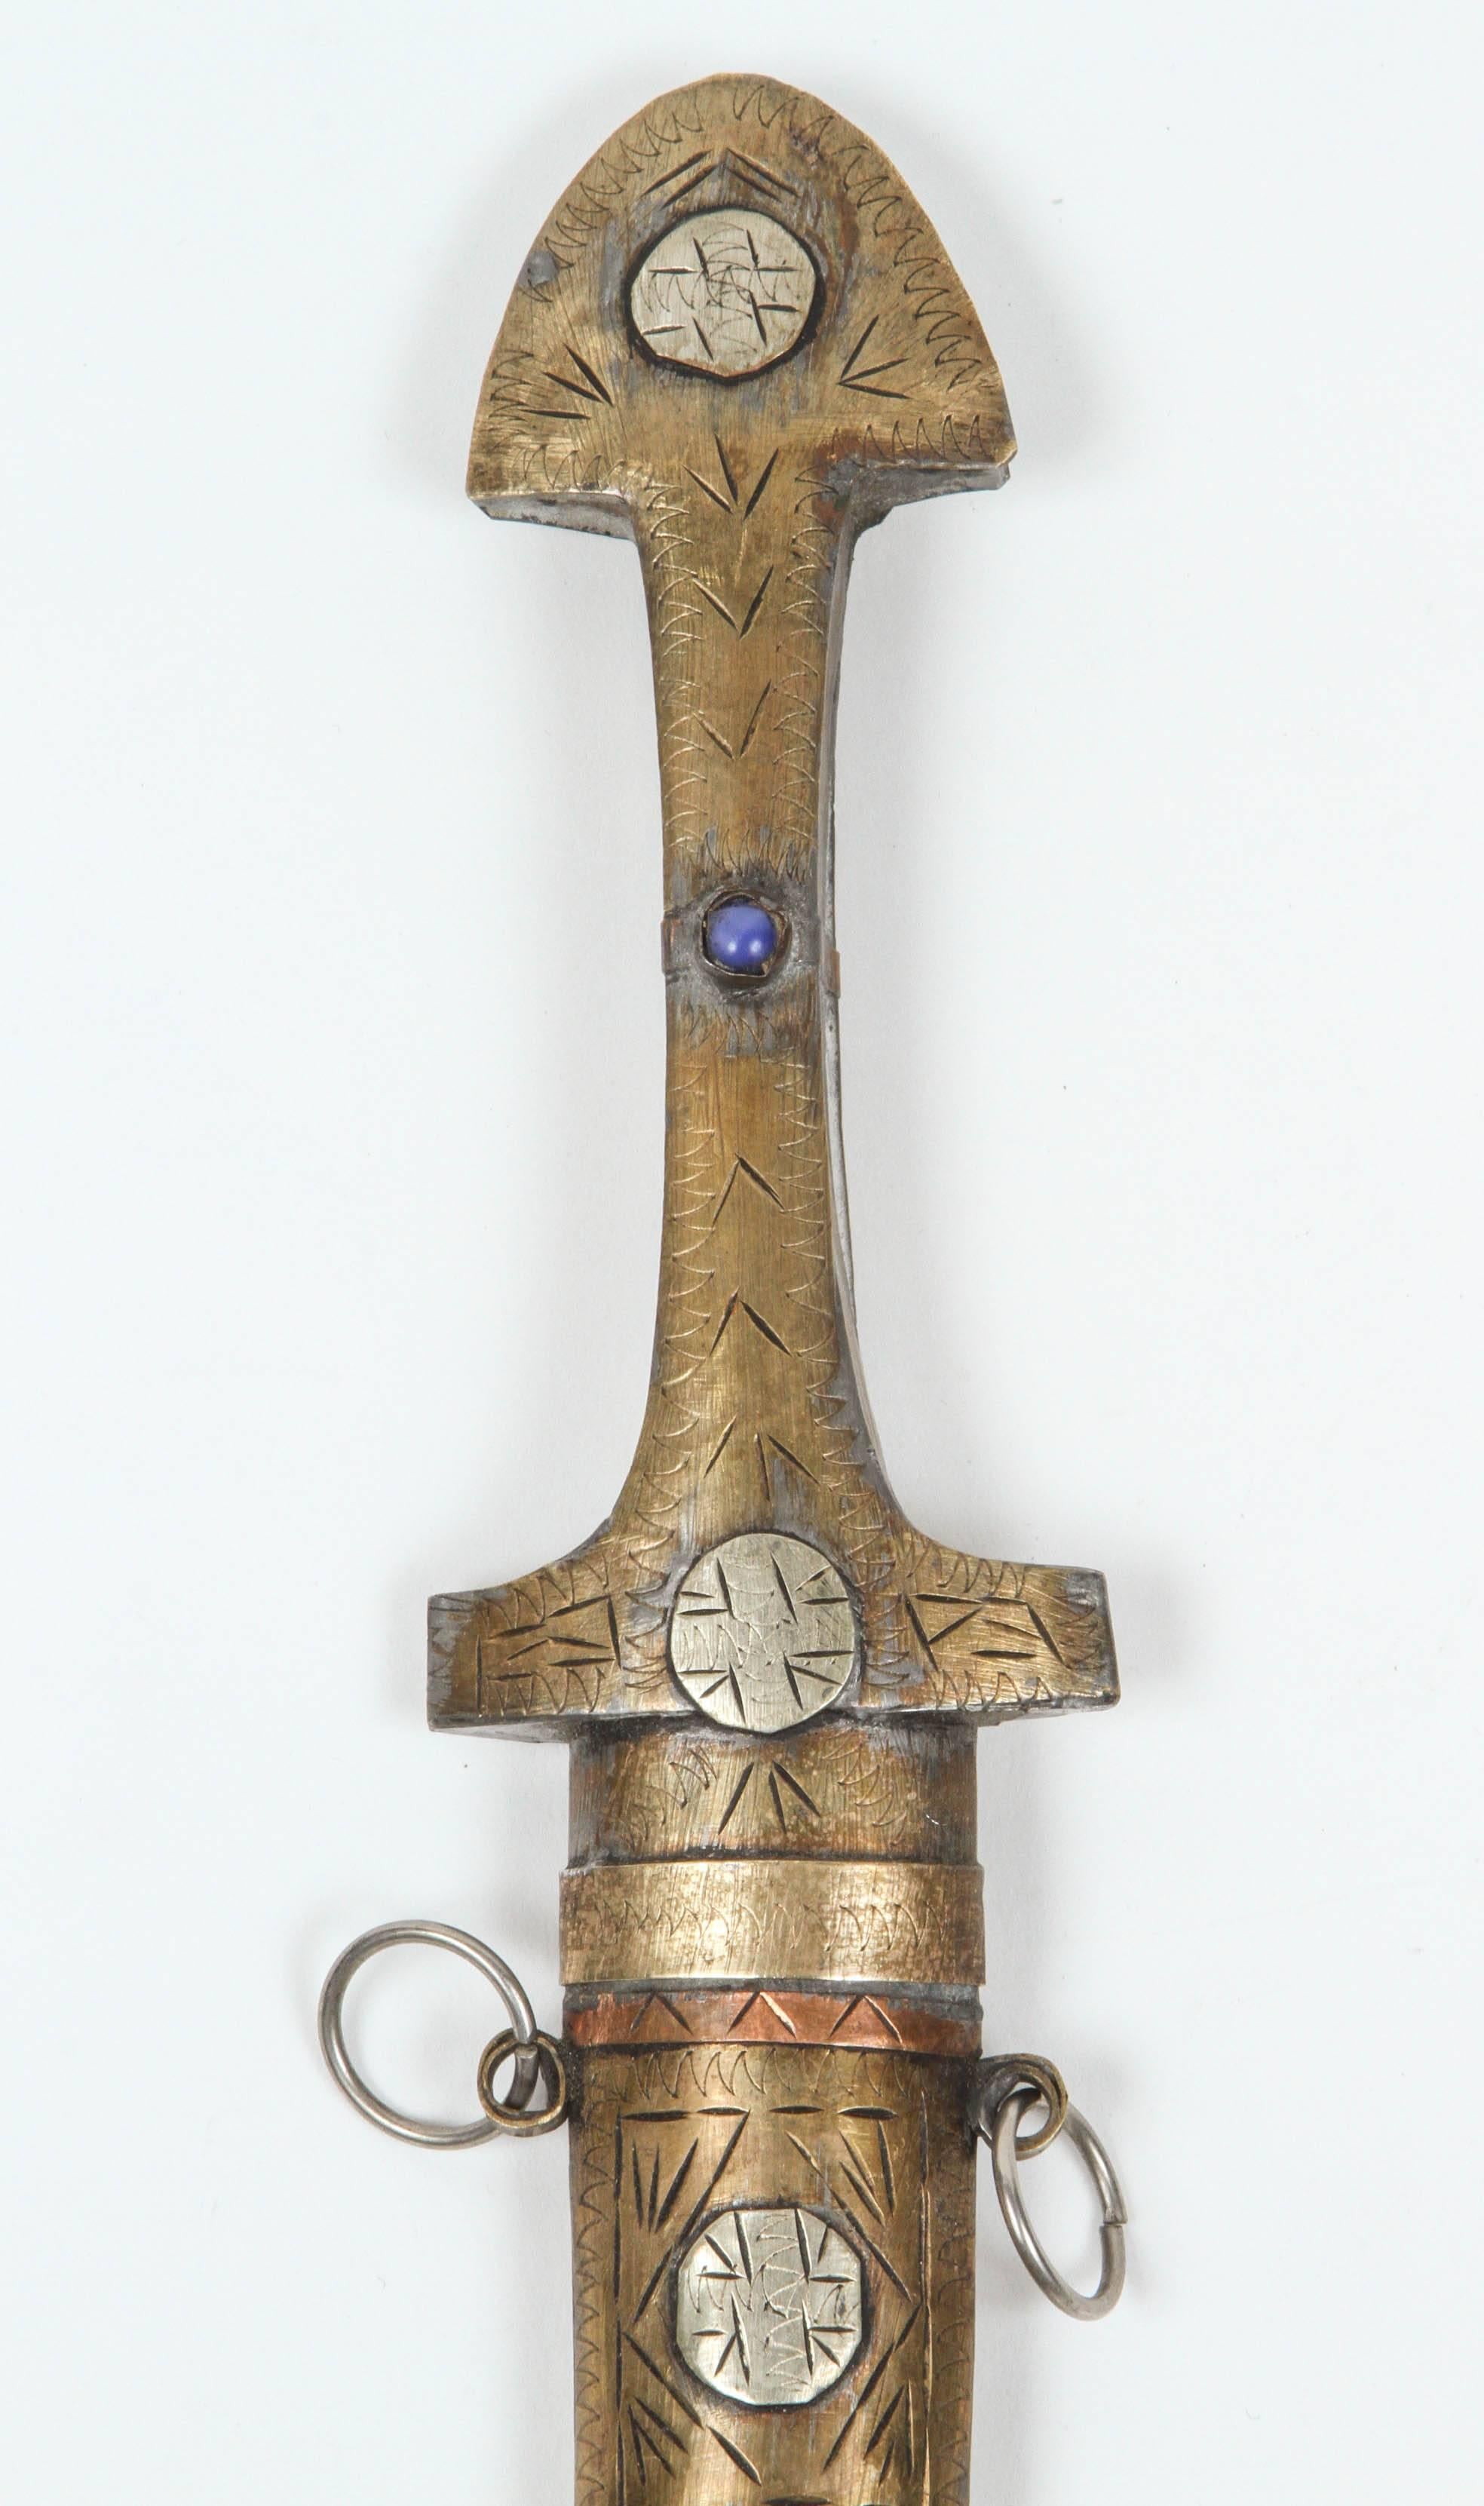 Handcrafted Moroccan brass dagger, mixed metal, copper, nickel and enamel.
Moroccan Hand carved Khoumiya dagger, of typical shape with curved blade, with brass fittings, complete with scabbard with tribal Berber motifs. 
Hand-crafted by artisans in